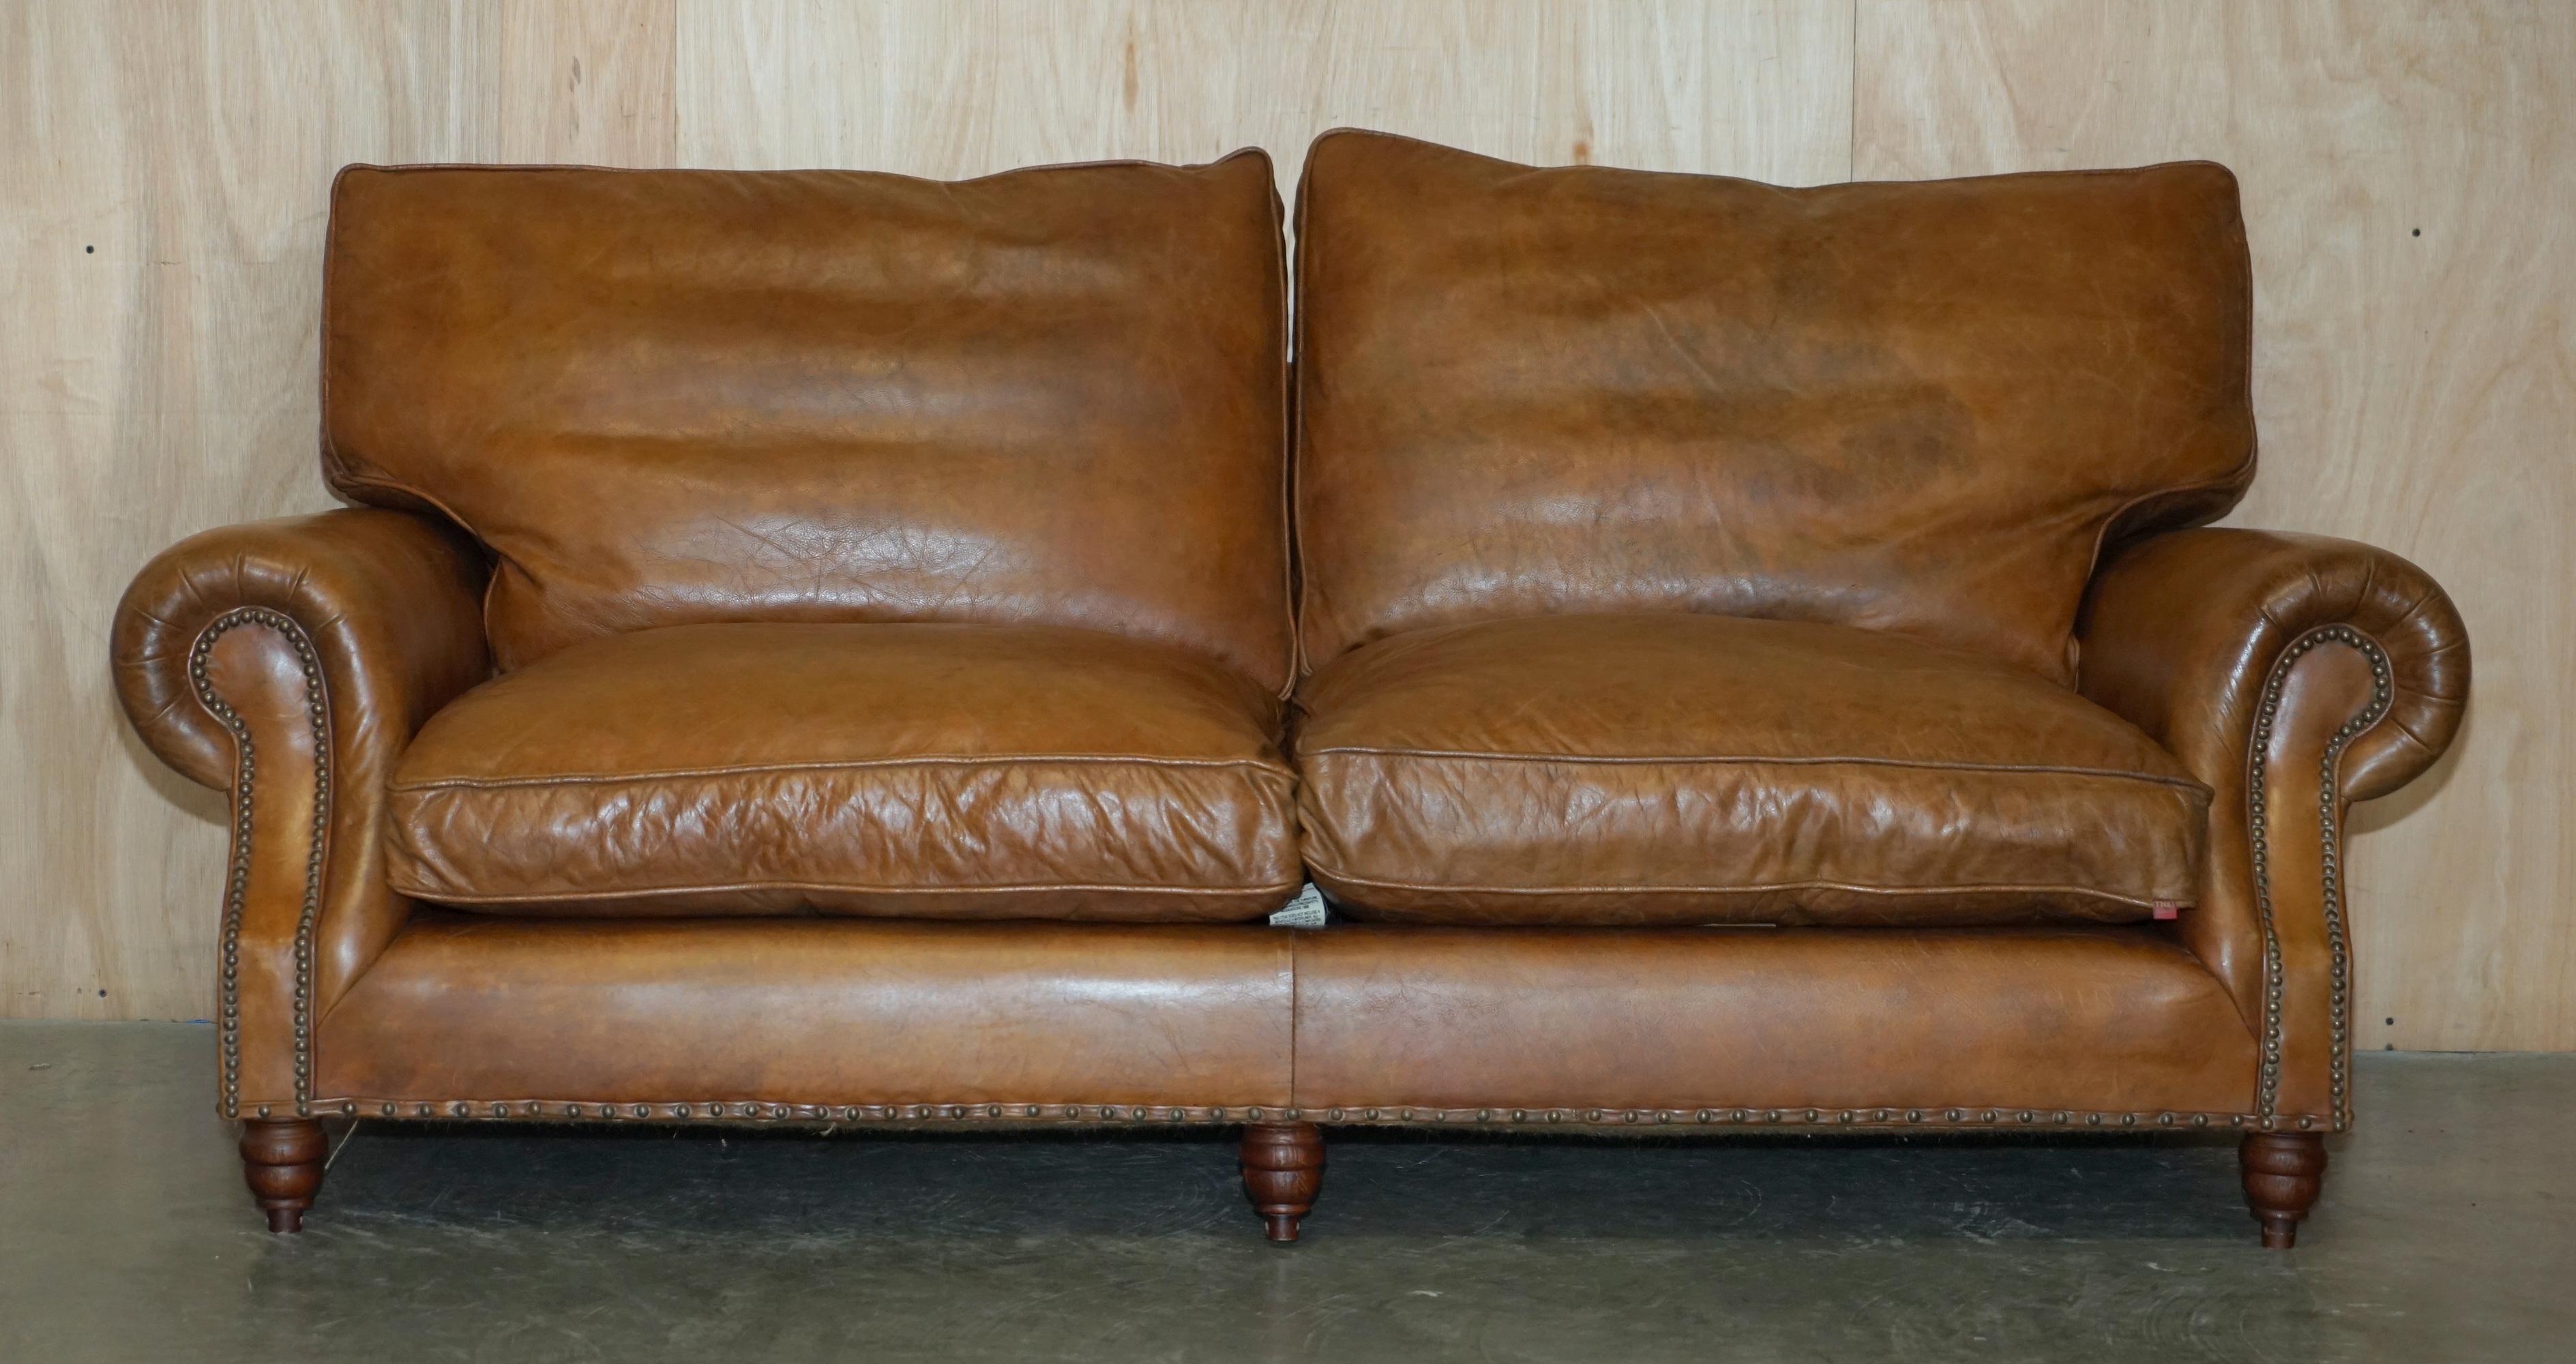 Royal House Antiques

Royal House Antiques is delighted to offer for sale this super comfortable, Timothy Oulton Balmoral, over sized Heritage brown leather sofa with two feather filled over stuffed cushions 

Please note the delivery fee listed is